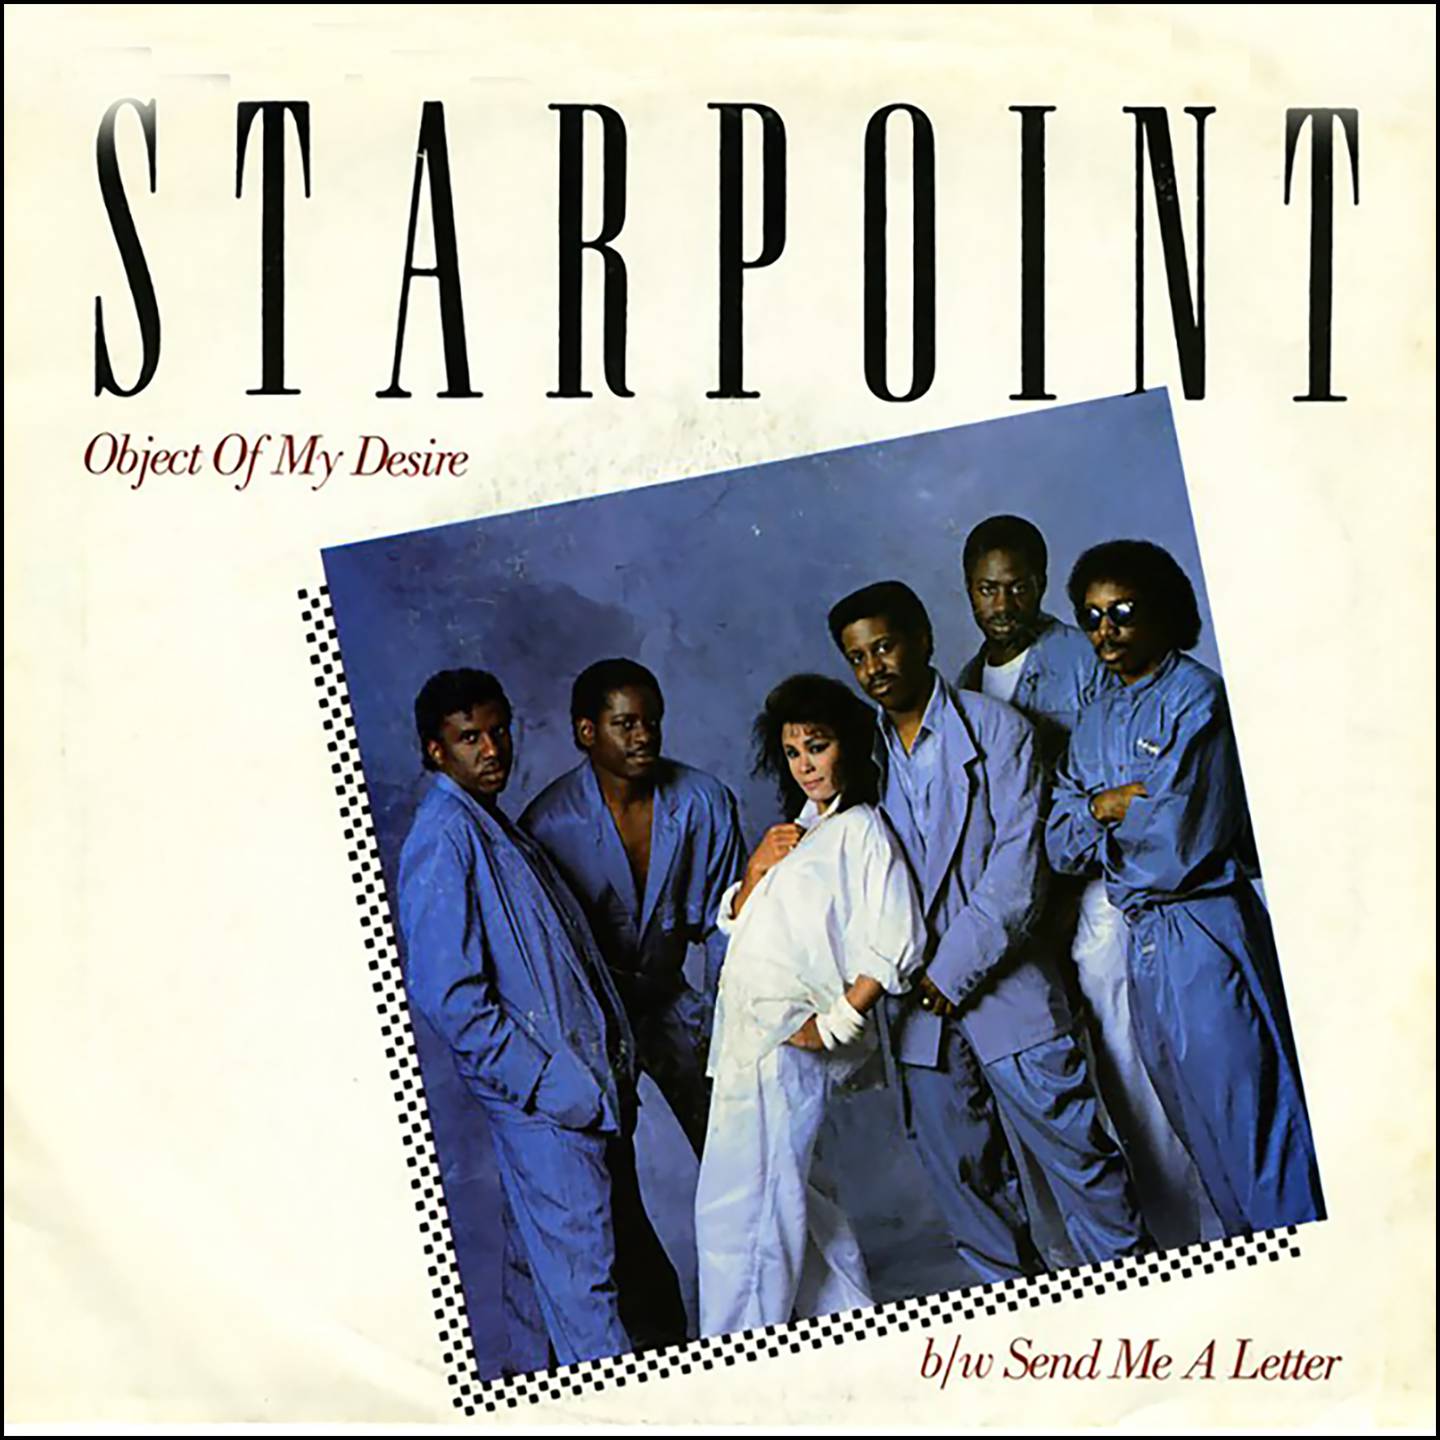 Starpoint took flight following the signing of a contract with . From 1980 through 1982, the band -- Renée Diggs, Kayode Adeyemo and Phillips brothers Ernesto, George, Greg, and Orlando.